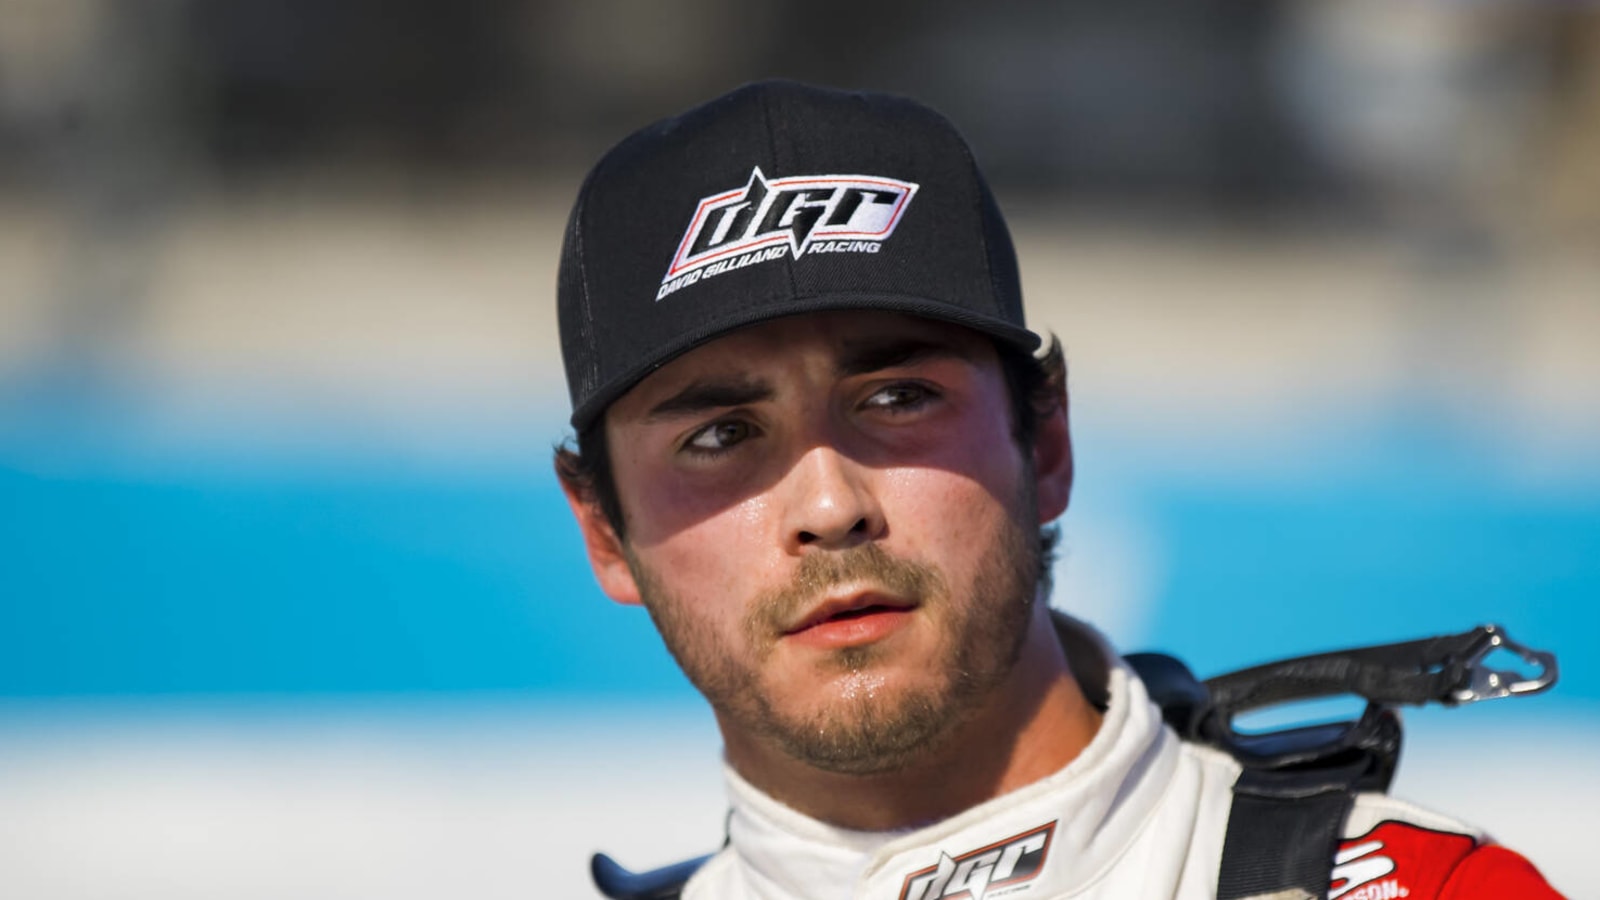 iRacing user made racially-charged comments posing as NASCAR Truck Series driver Tanner Gray